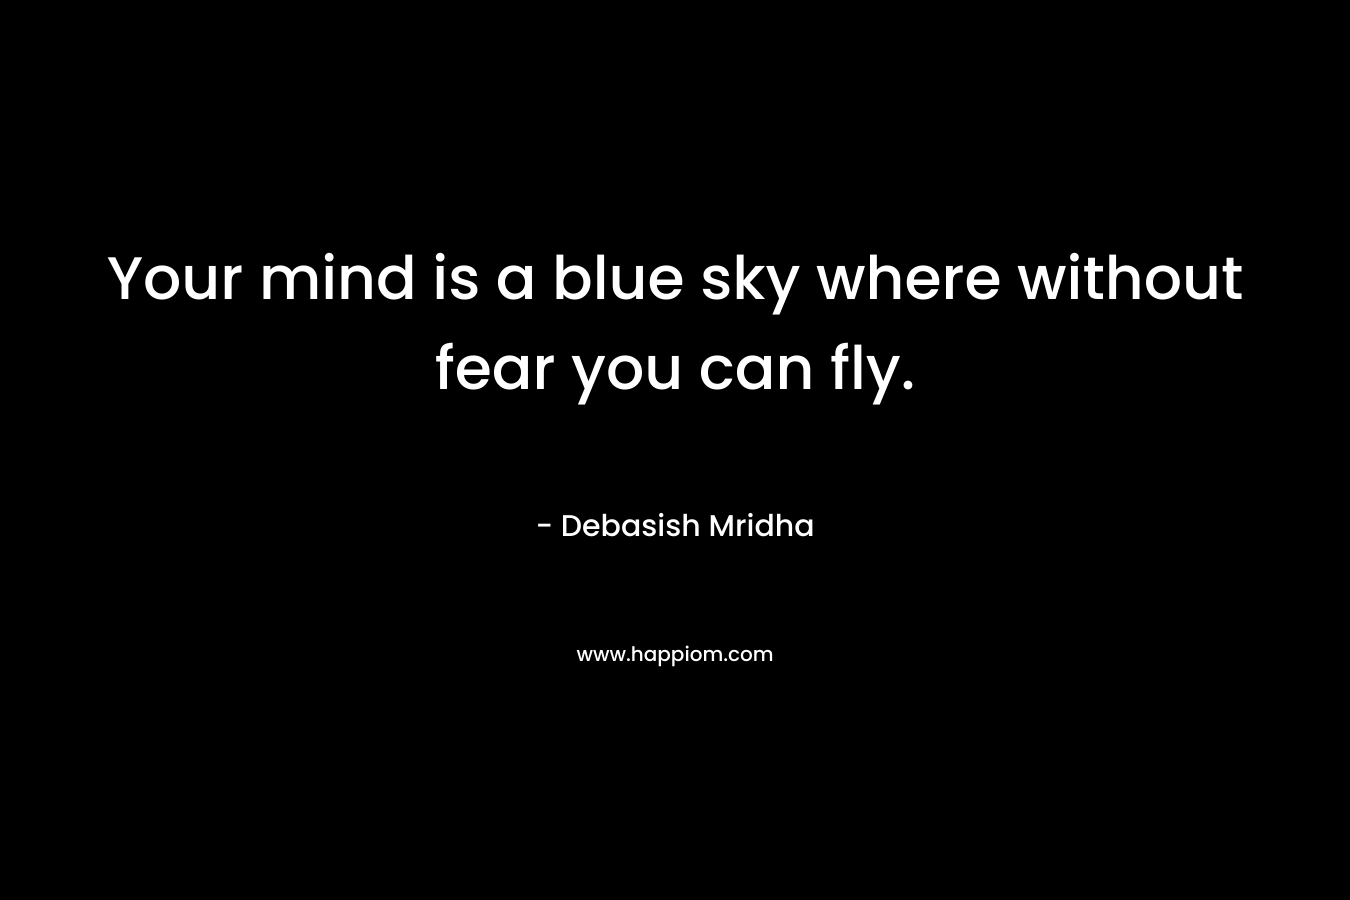 Your mind is a blue sky where without fear you can fly.